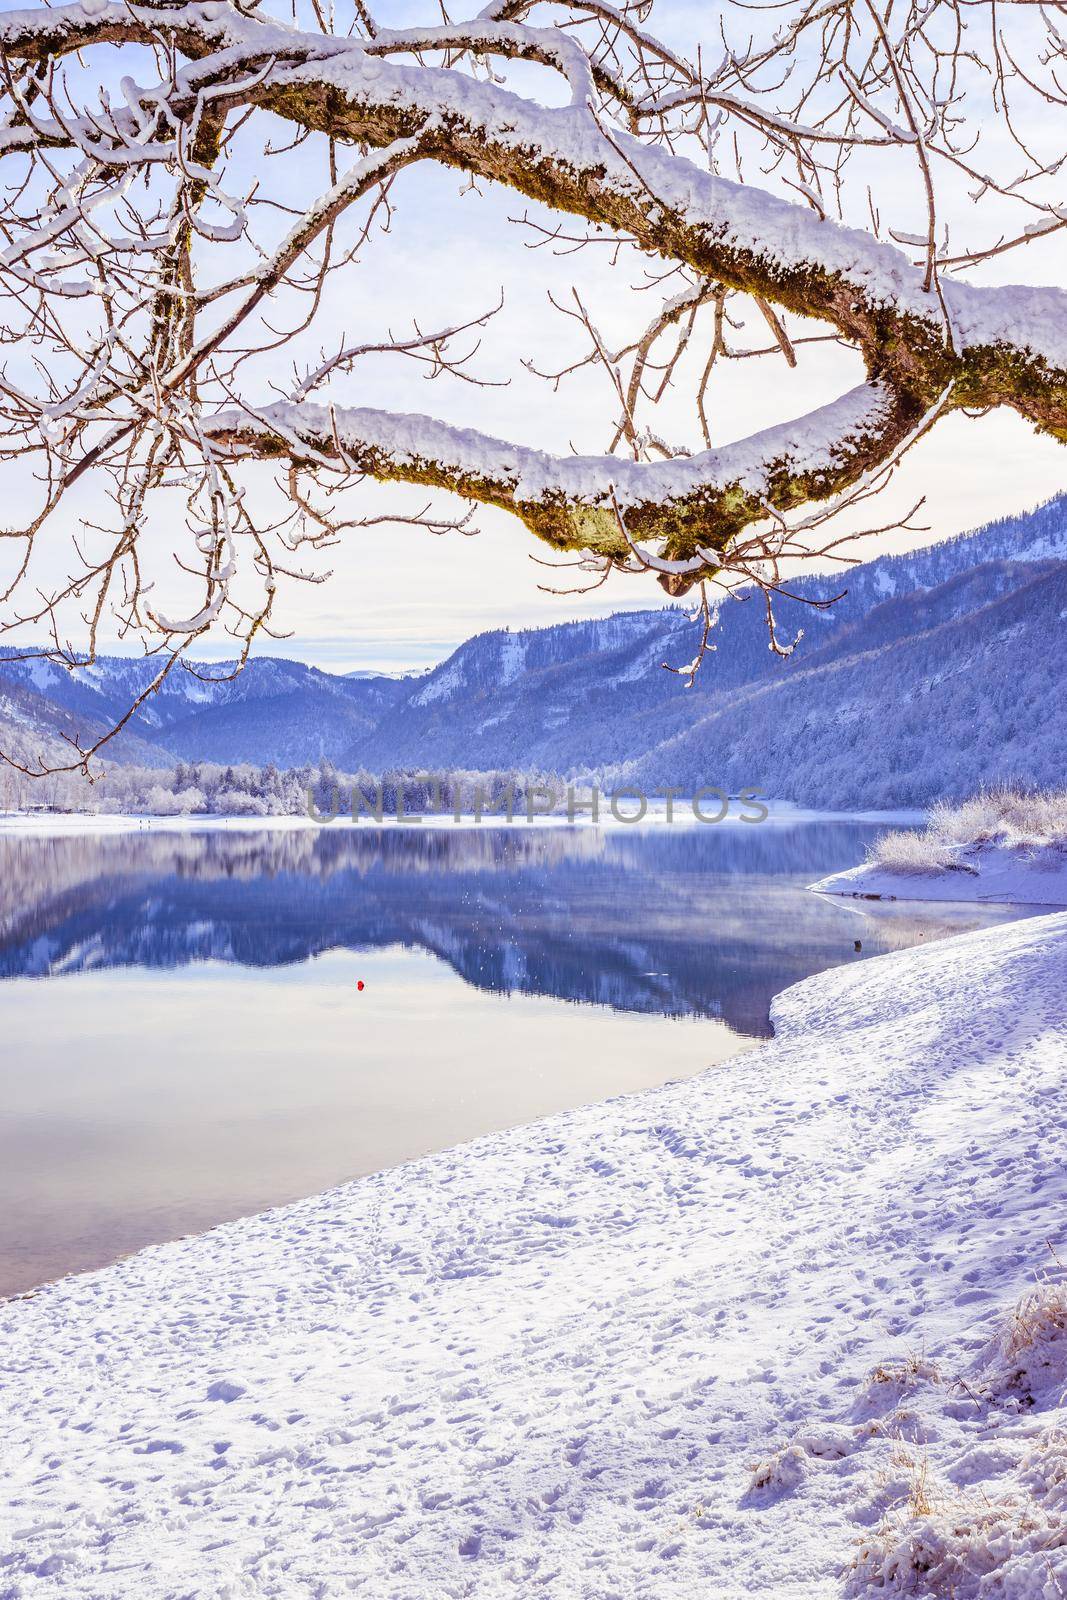 Sunny winter landscape in the alps: Lake Hintersee in Salzburg, snowy trees and mountains by Daxenbichler